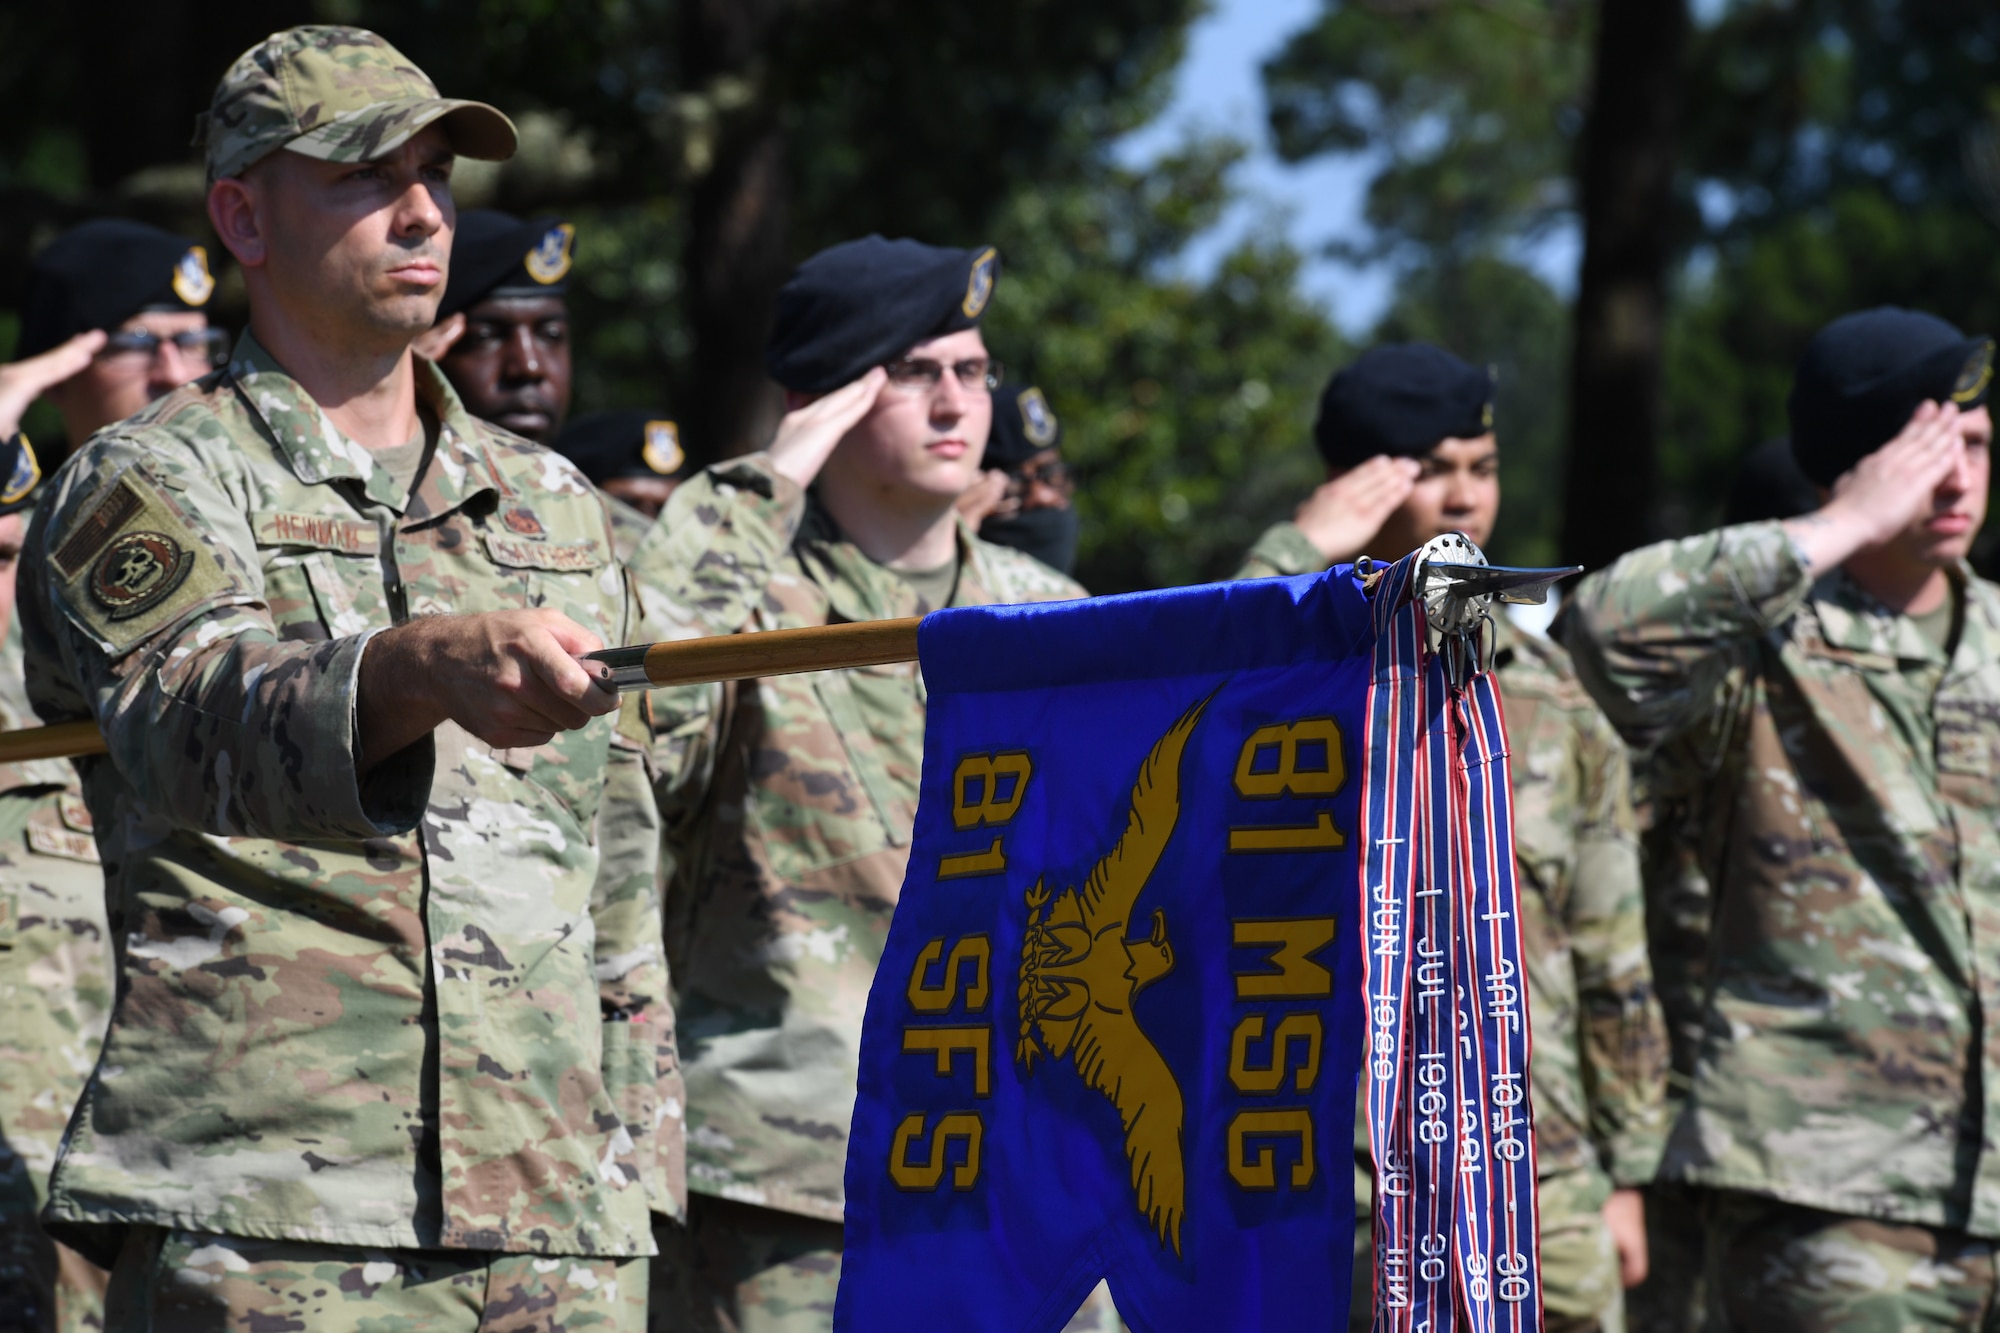 An 81st Security Forces Squadron guidon is displayed during a retreat ceremony at Keesler Air Force Base, Mississippi, May 20, 2022. The ceremony, hosted by the 81st SFS, was the last of several events held in celebration of this year's Police Week. (U.S. Air Force photo by Kemberly Groue)